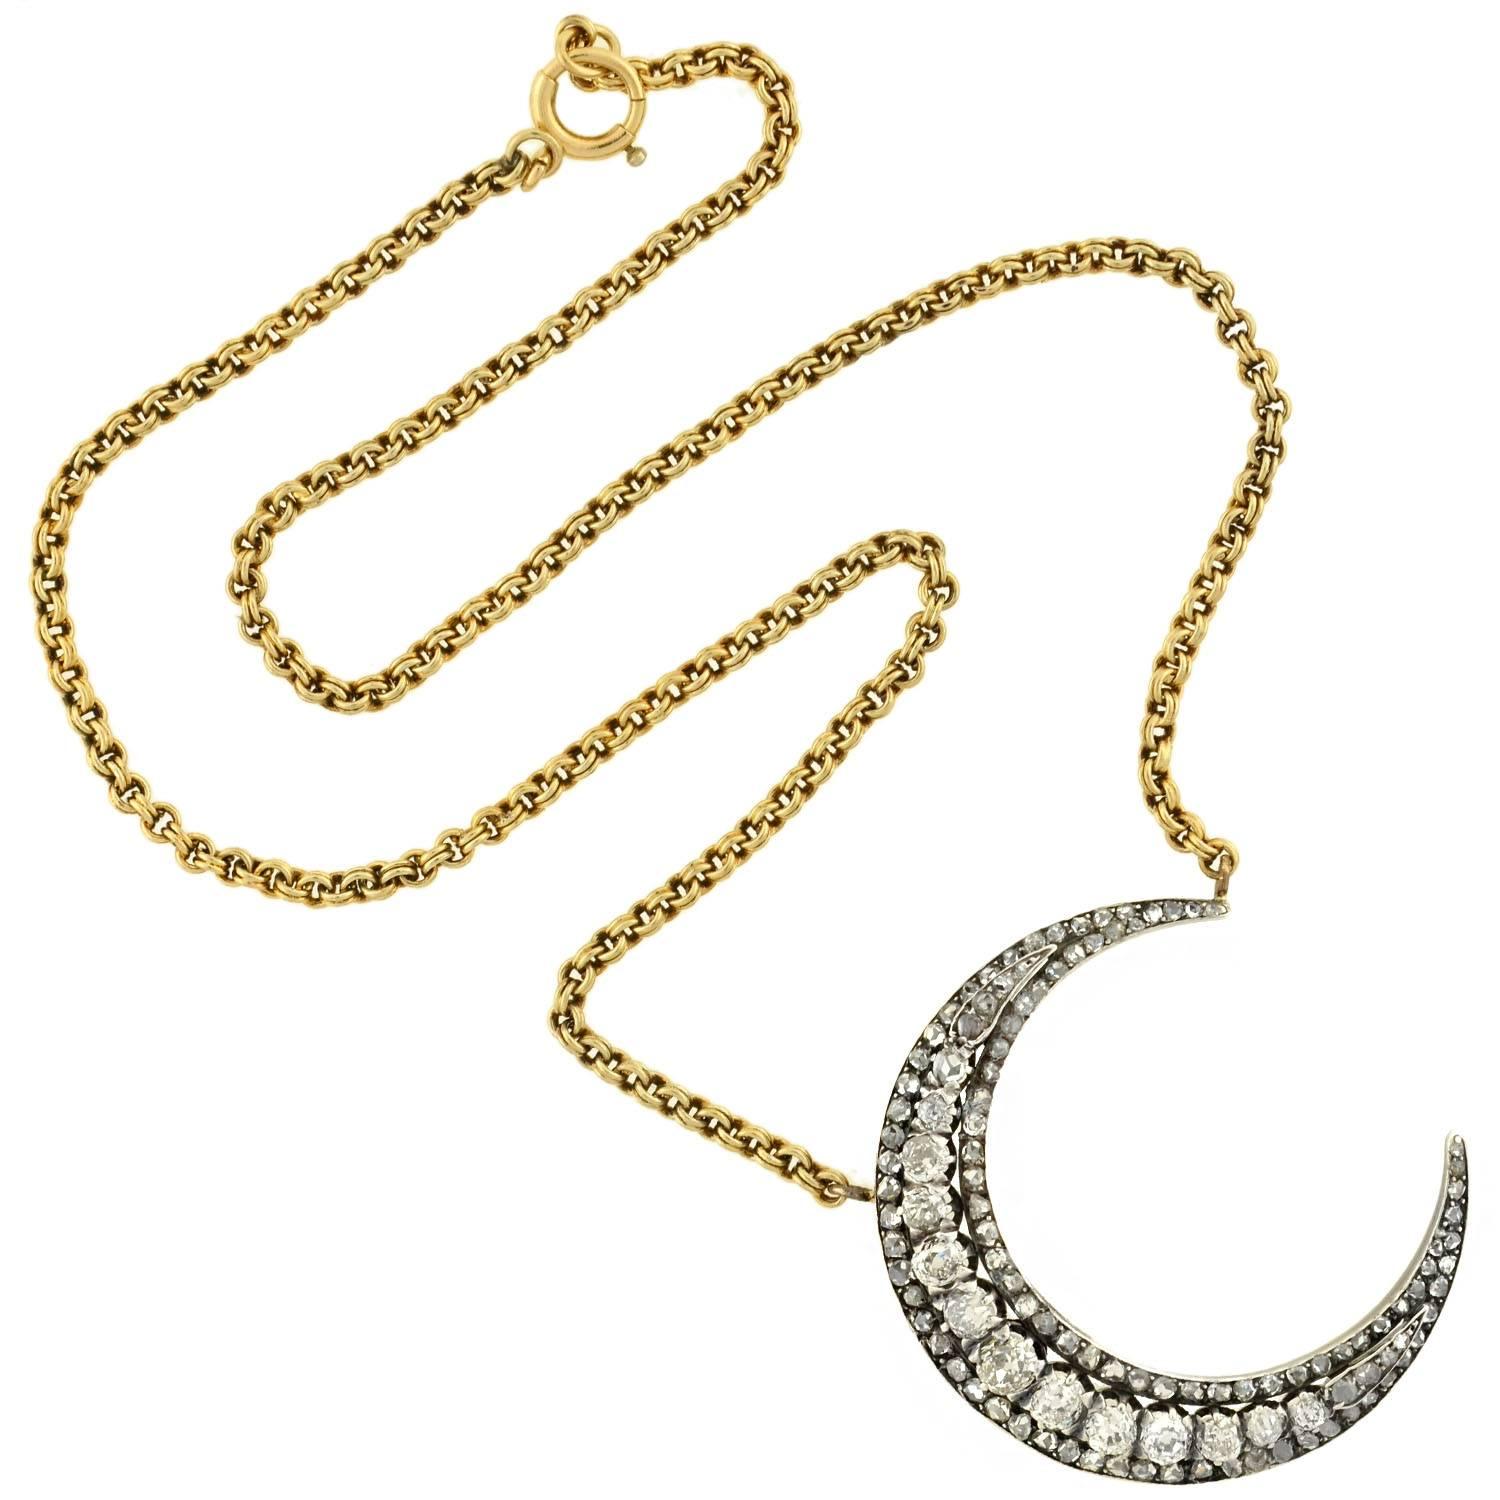 This diamond crescent necklace from the Victorian era (ca1880) is truly spectacular! Made of sterling-topped 18kt yellow gold, the piece depicts a crescent moon, which is quite substantial in size and mesmerizing in design. The entire surface is